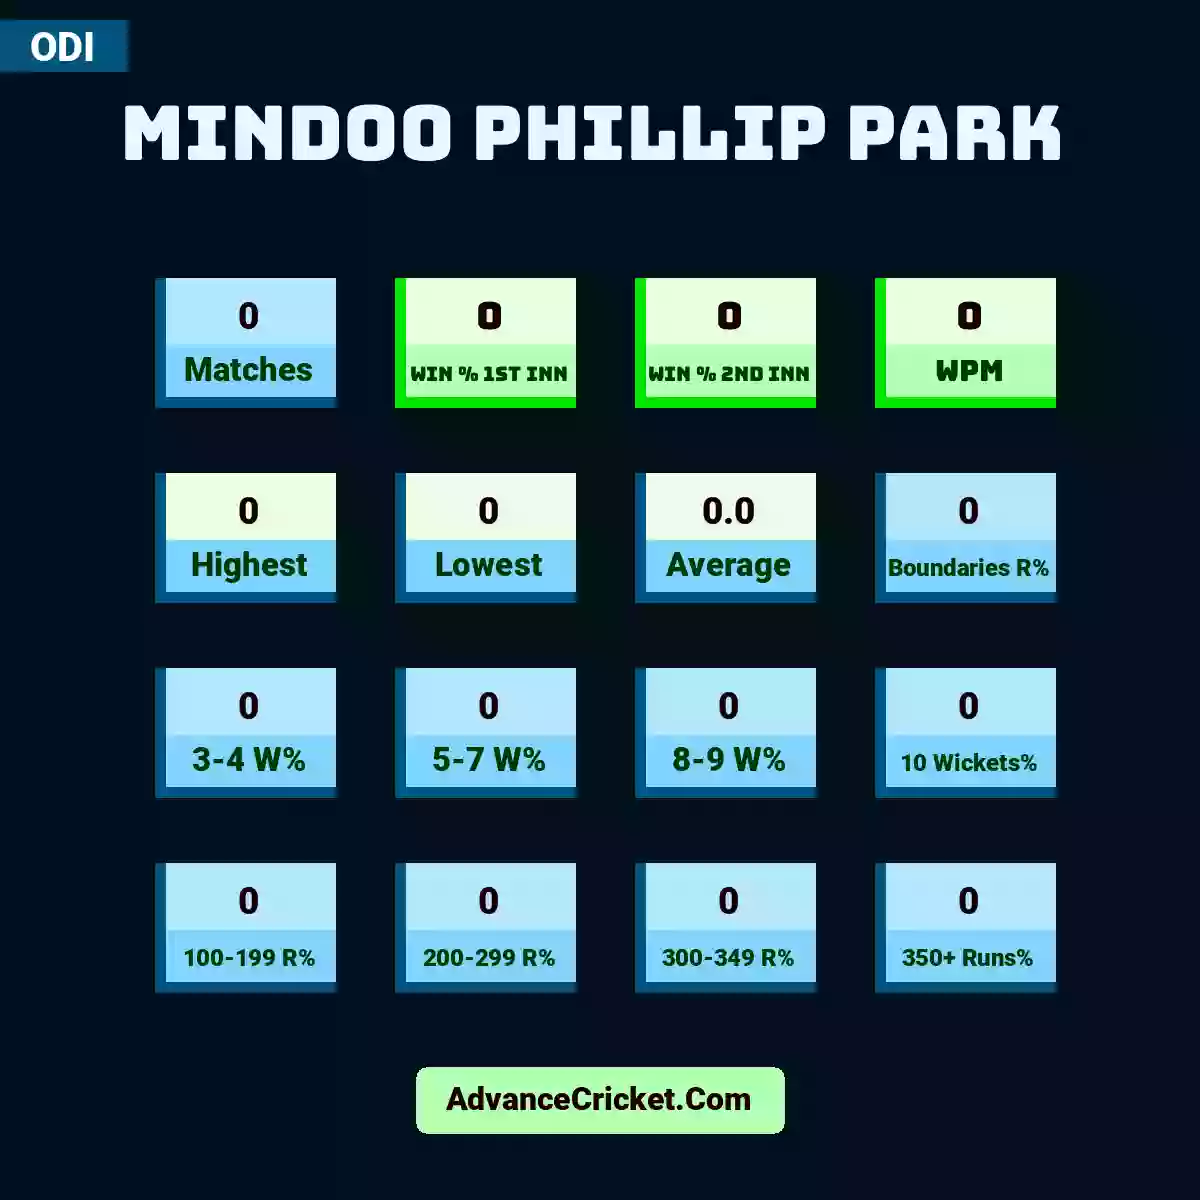 Image showing Mindoo Phillip Park  with Matches: 0, Win % 1st Inn: 0, Win % 2nd Inn: 0, WPM: 0, Highest: 0, Lowest: 0, Average: 0.0, Boundaries R%: 0, 3-4 W%: 0, 5-7 W%: 0, 8-9 W%: 0, 10 Wickets%: 0, 100-199 R%: 0, 200-299 R%: 0, 300-349 R%: 0, 350+ Runs%: 0.